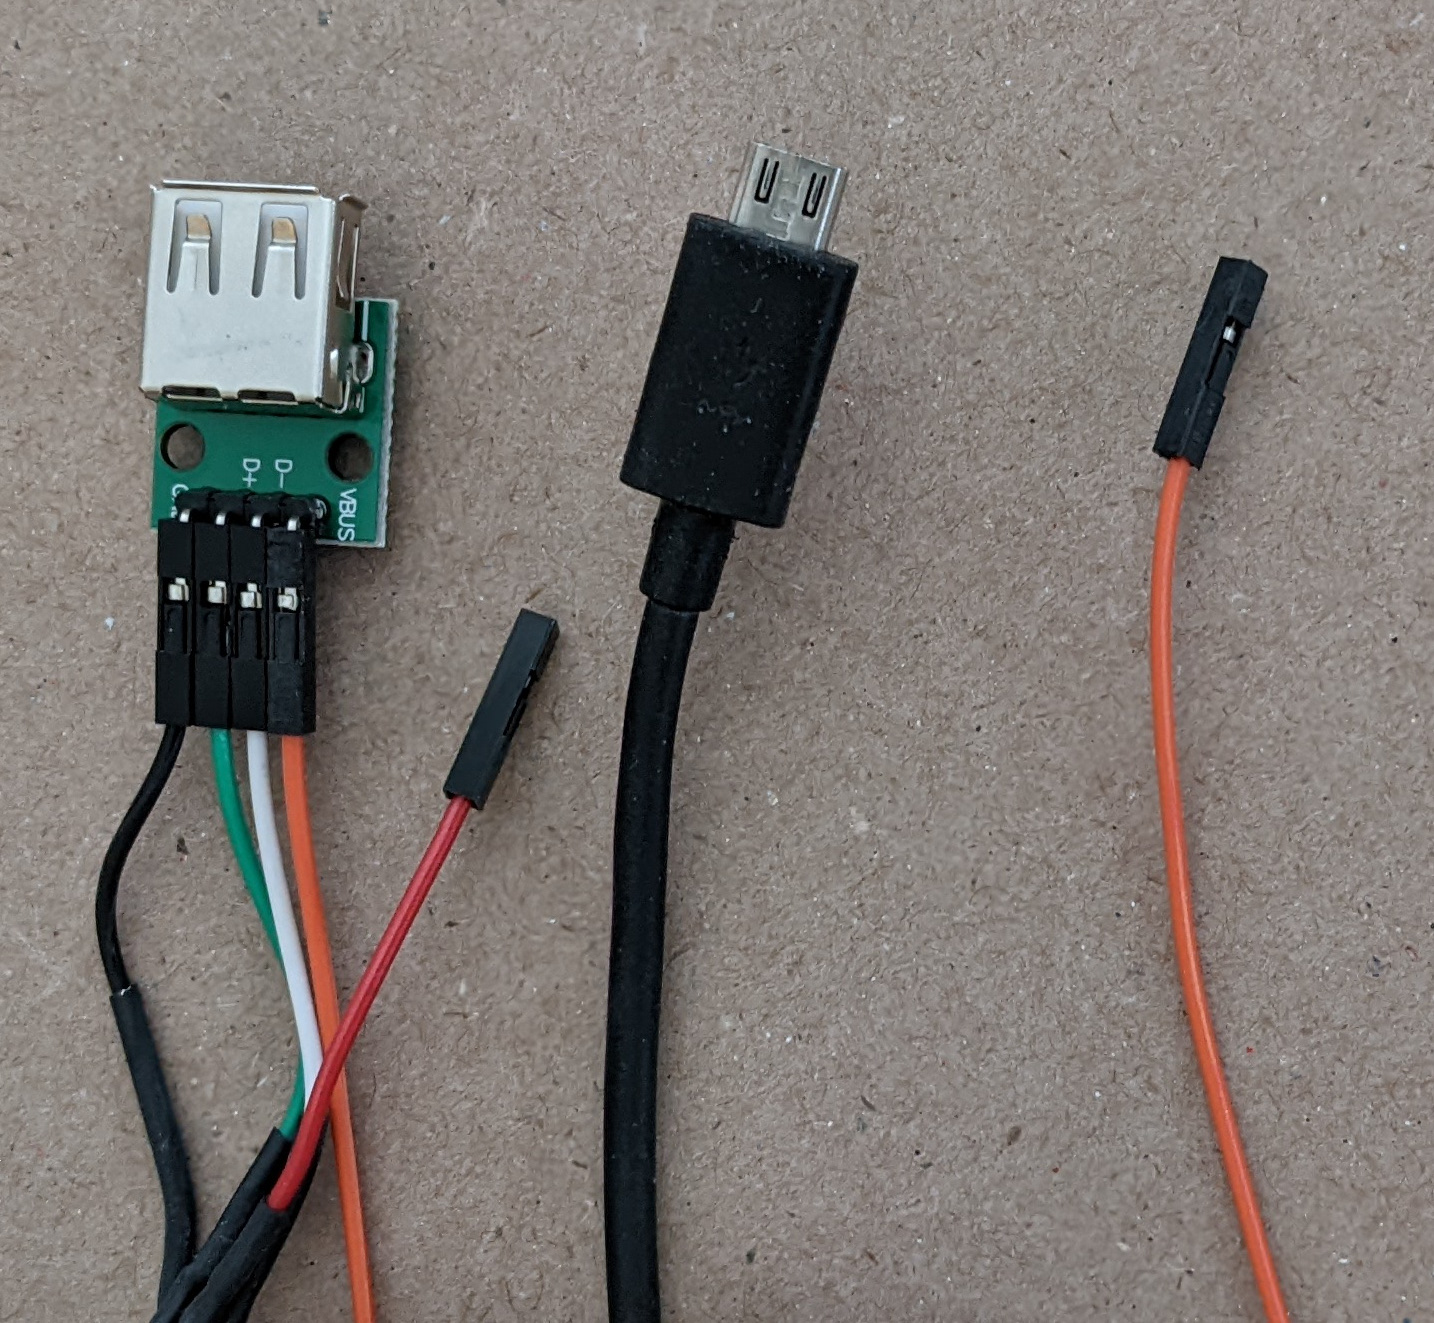 USB host cable